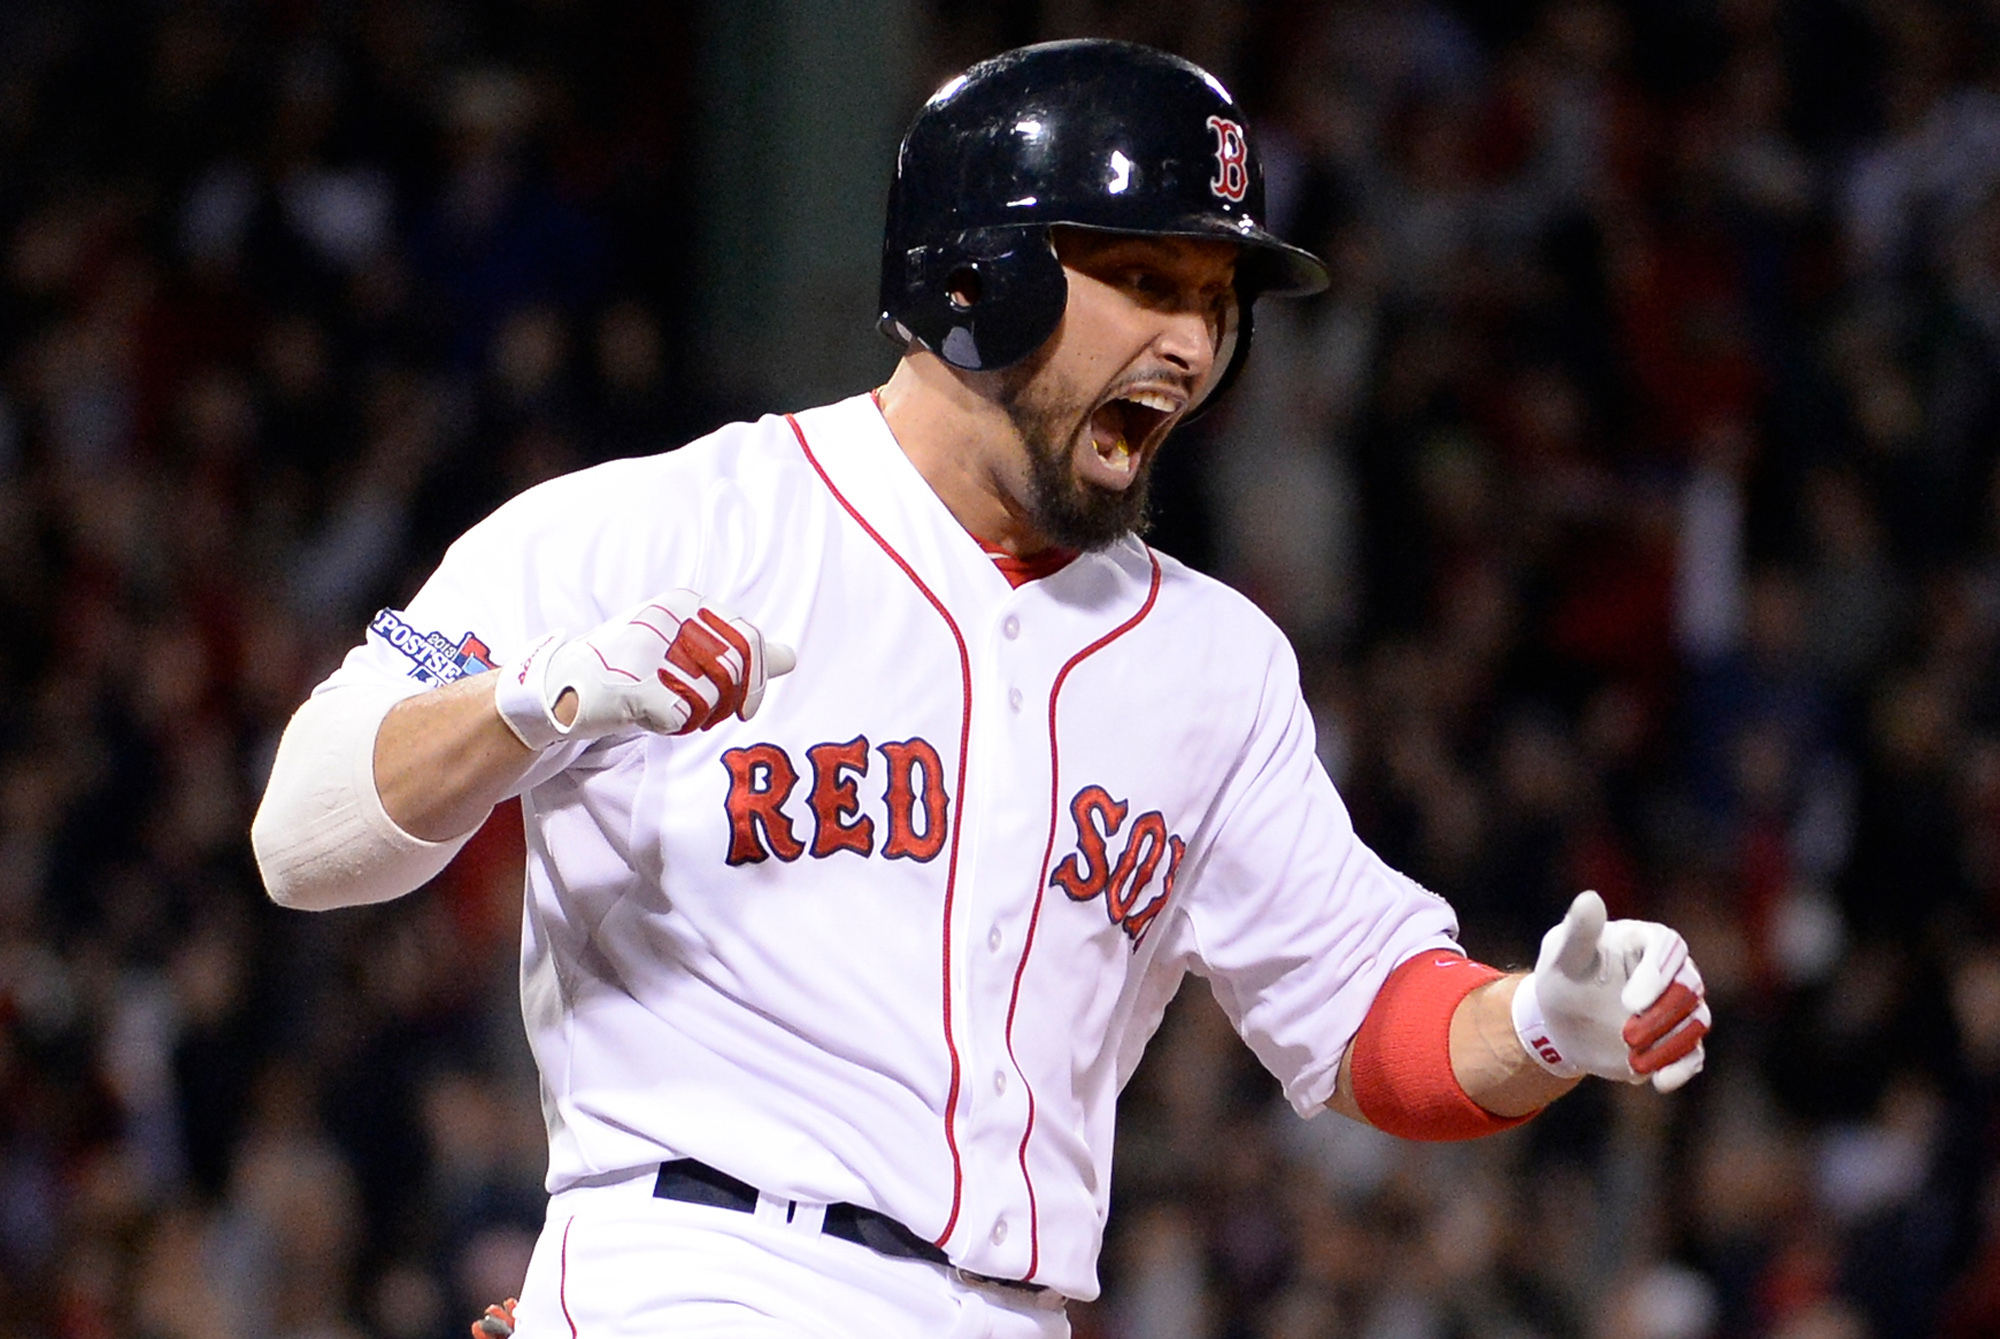 Where Does Victorino's Slam Rank Among Epic Home Runs in Sox